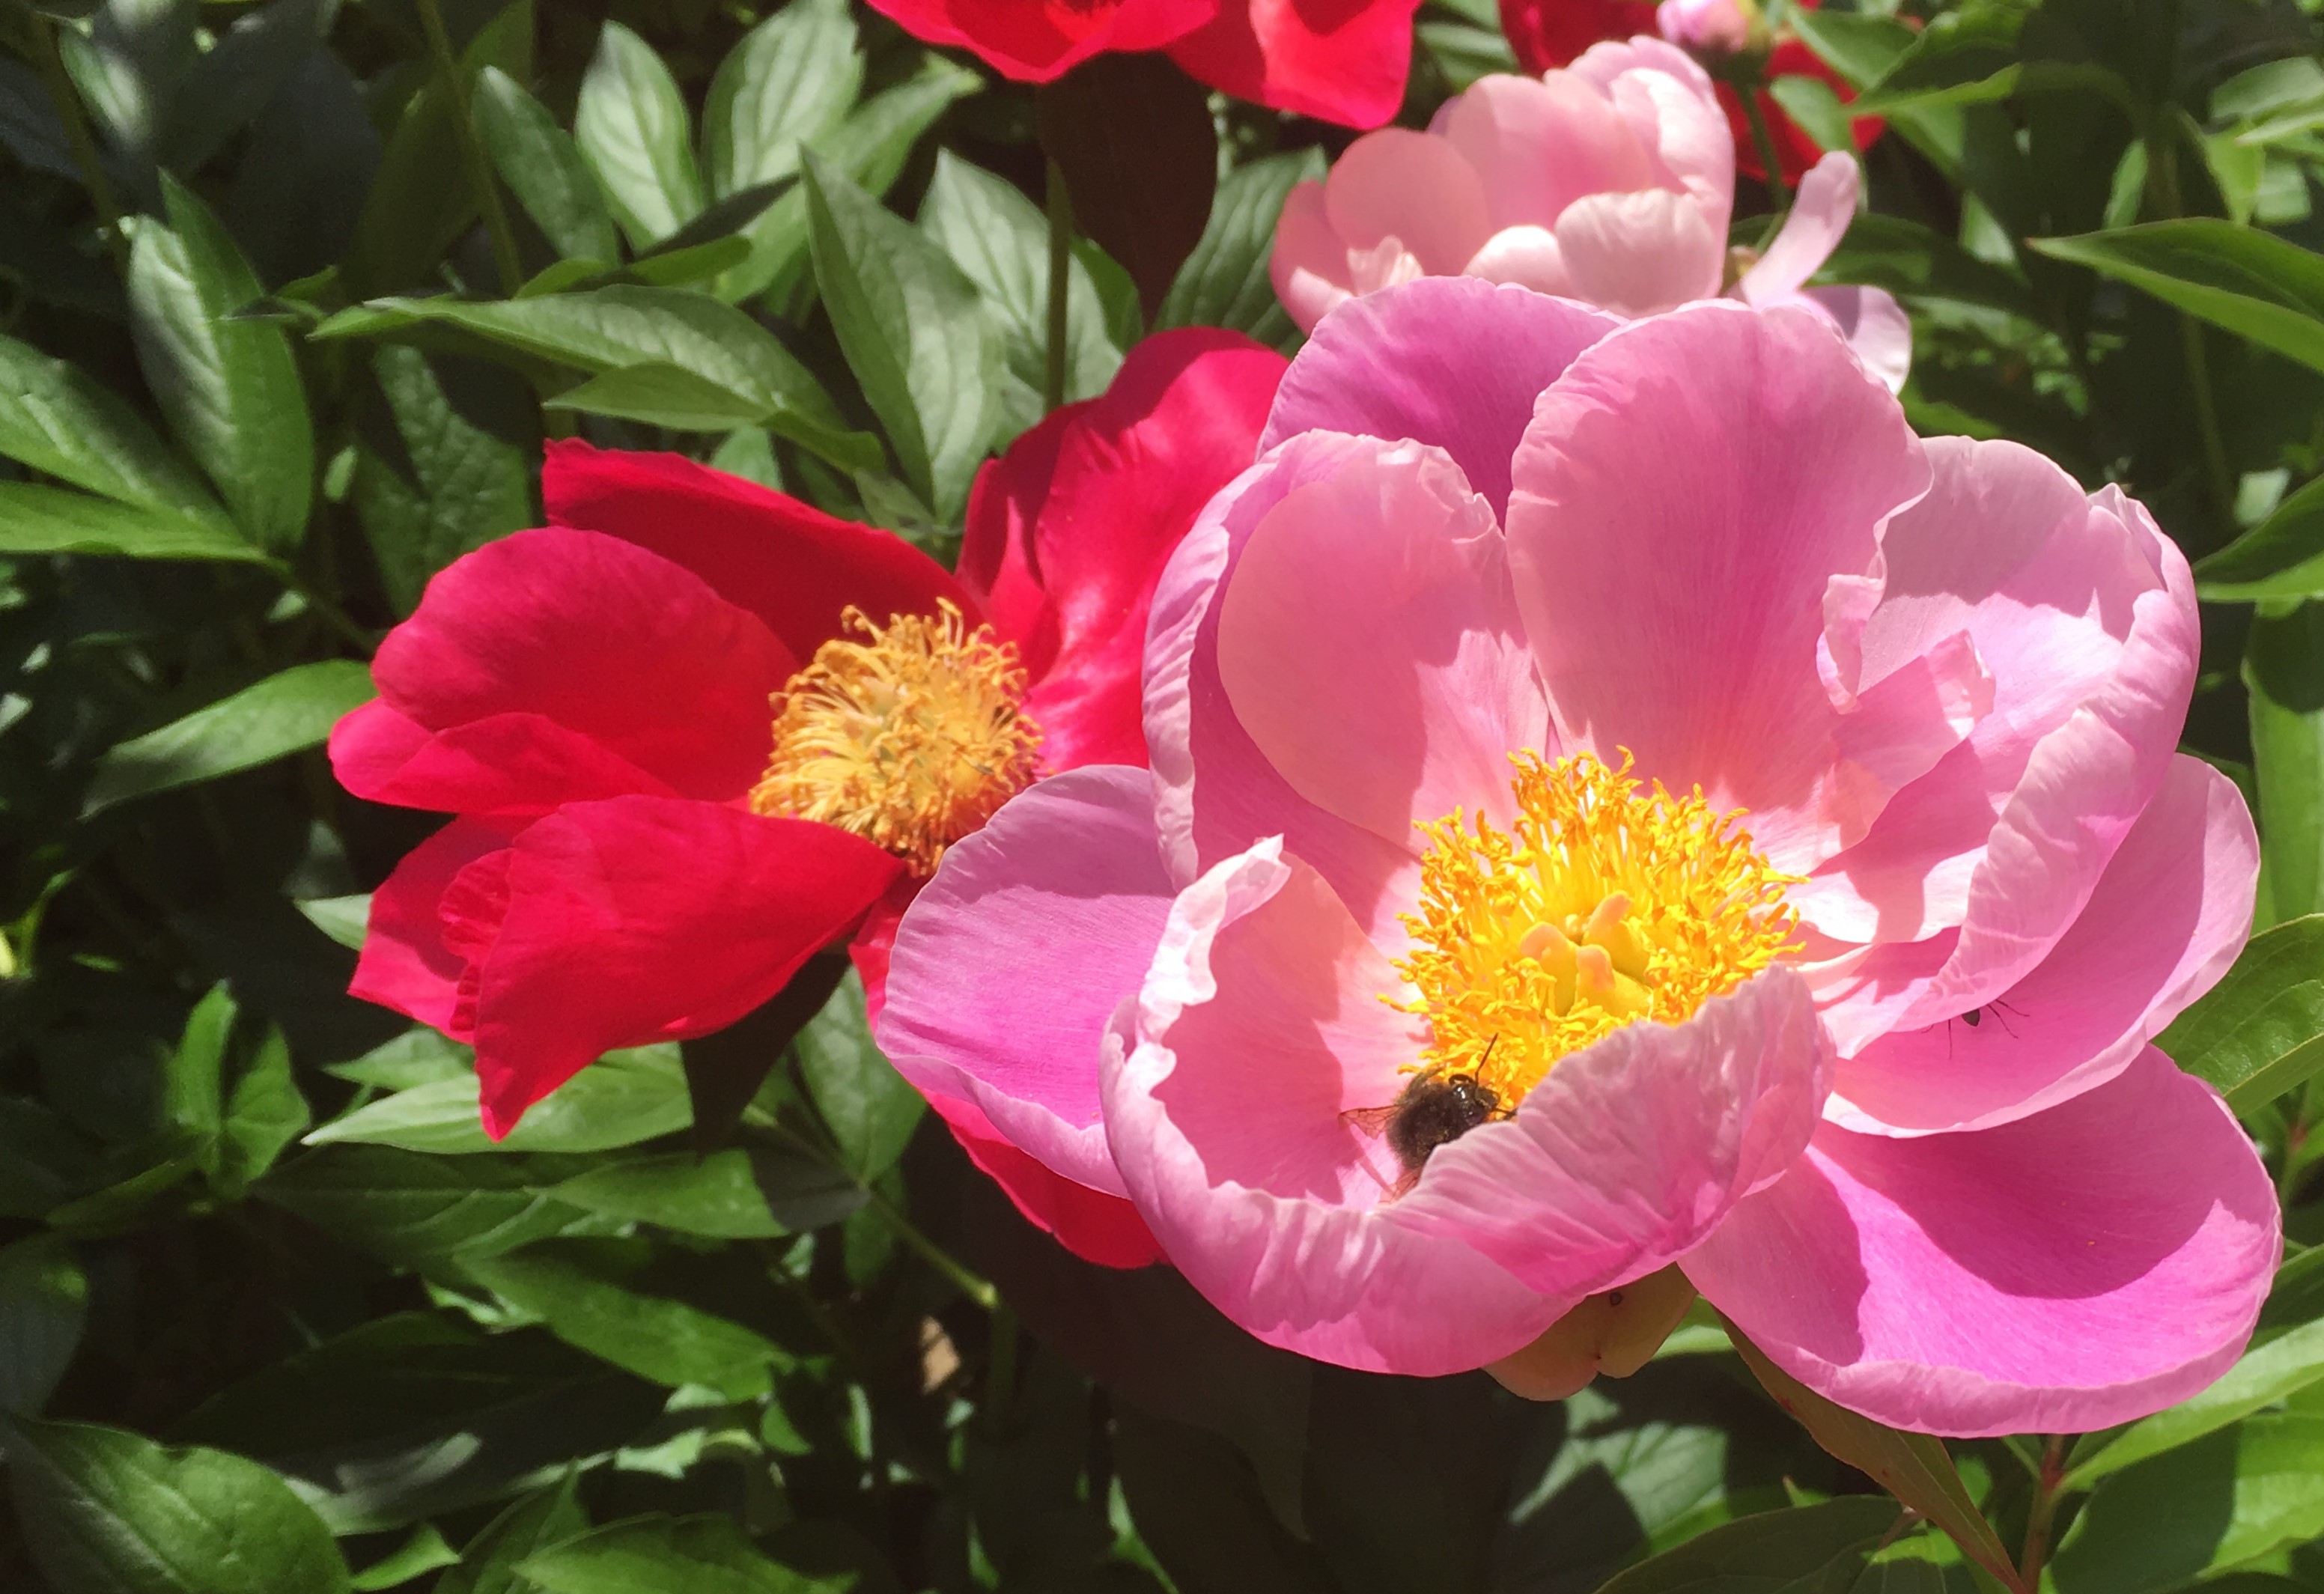 pink and red peonies with a bee sitting in the center of the pink one